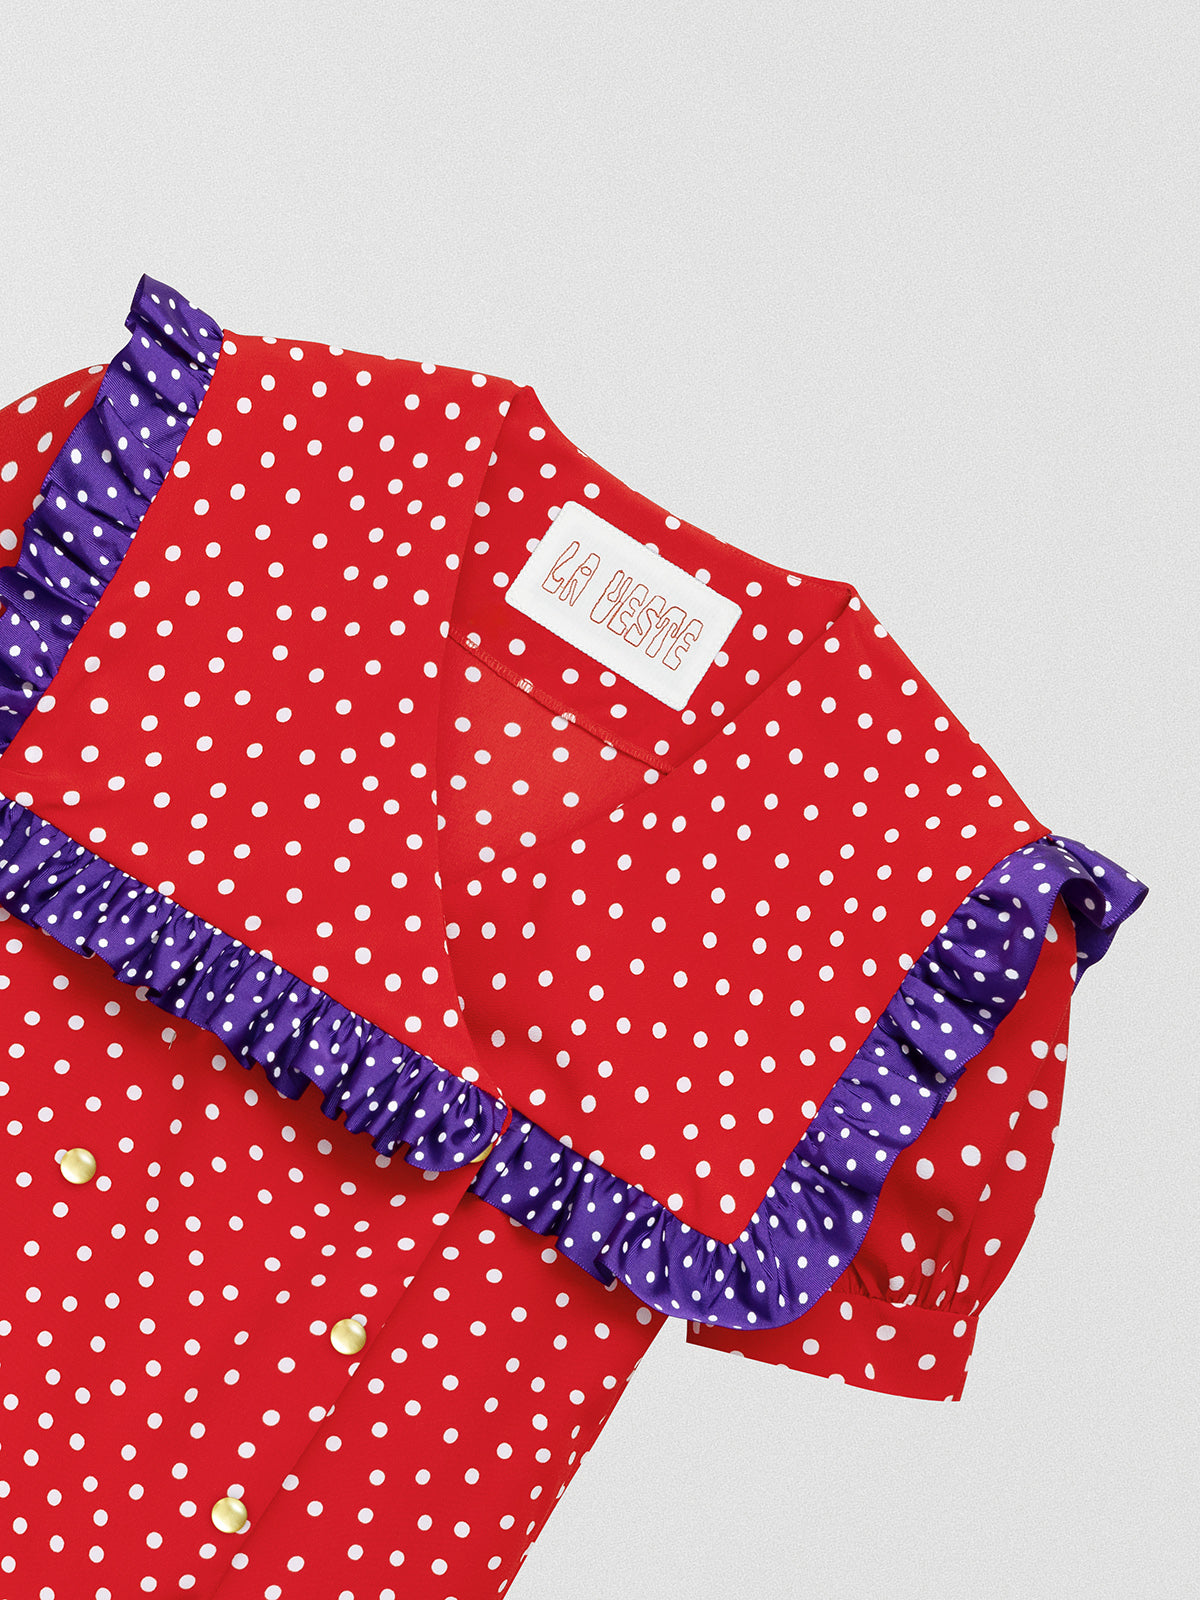 Red shirt with polka dots and square ruffle on the collar